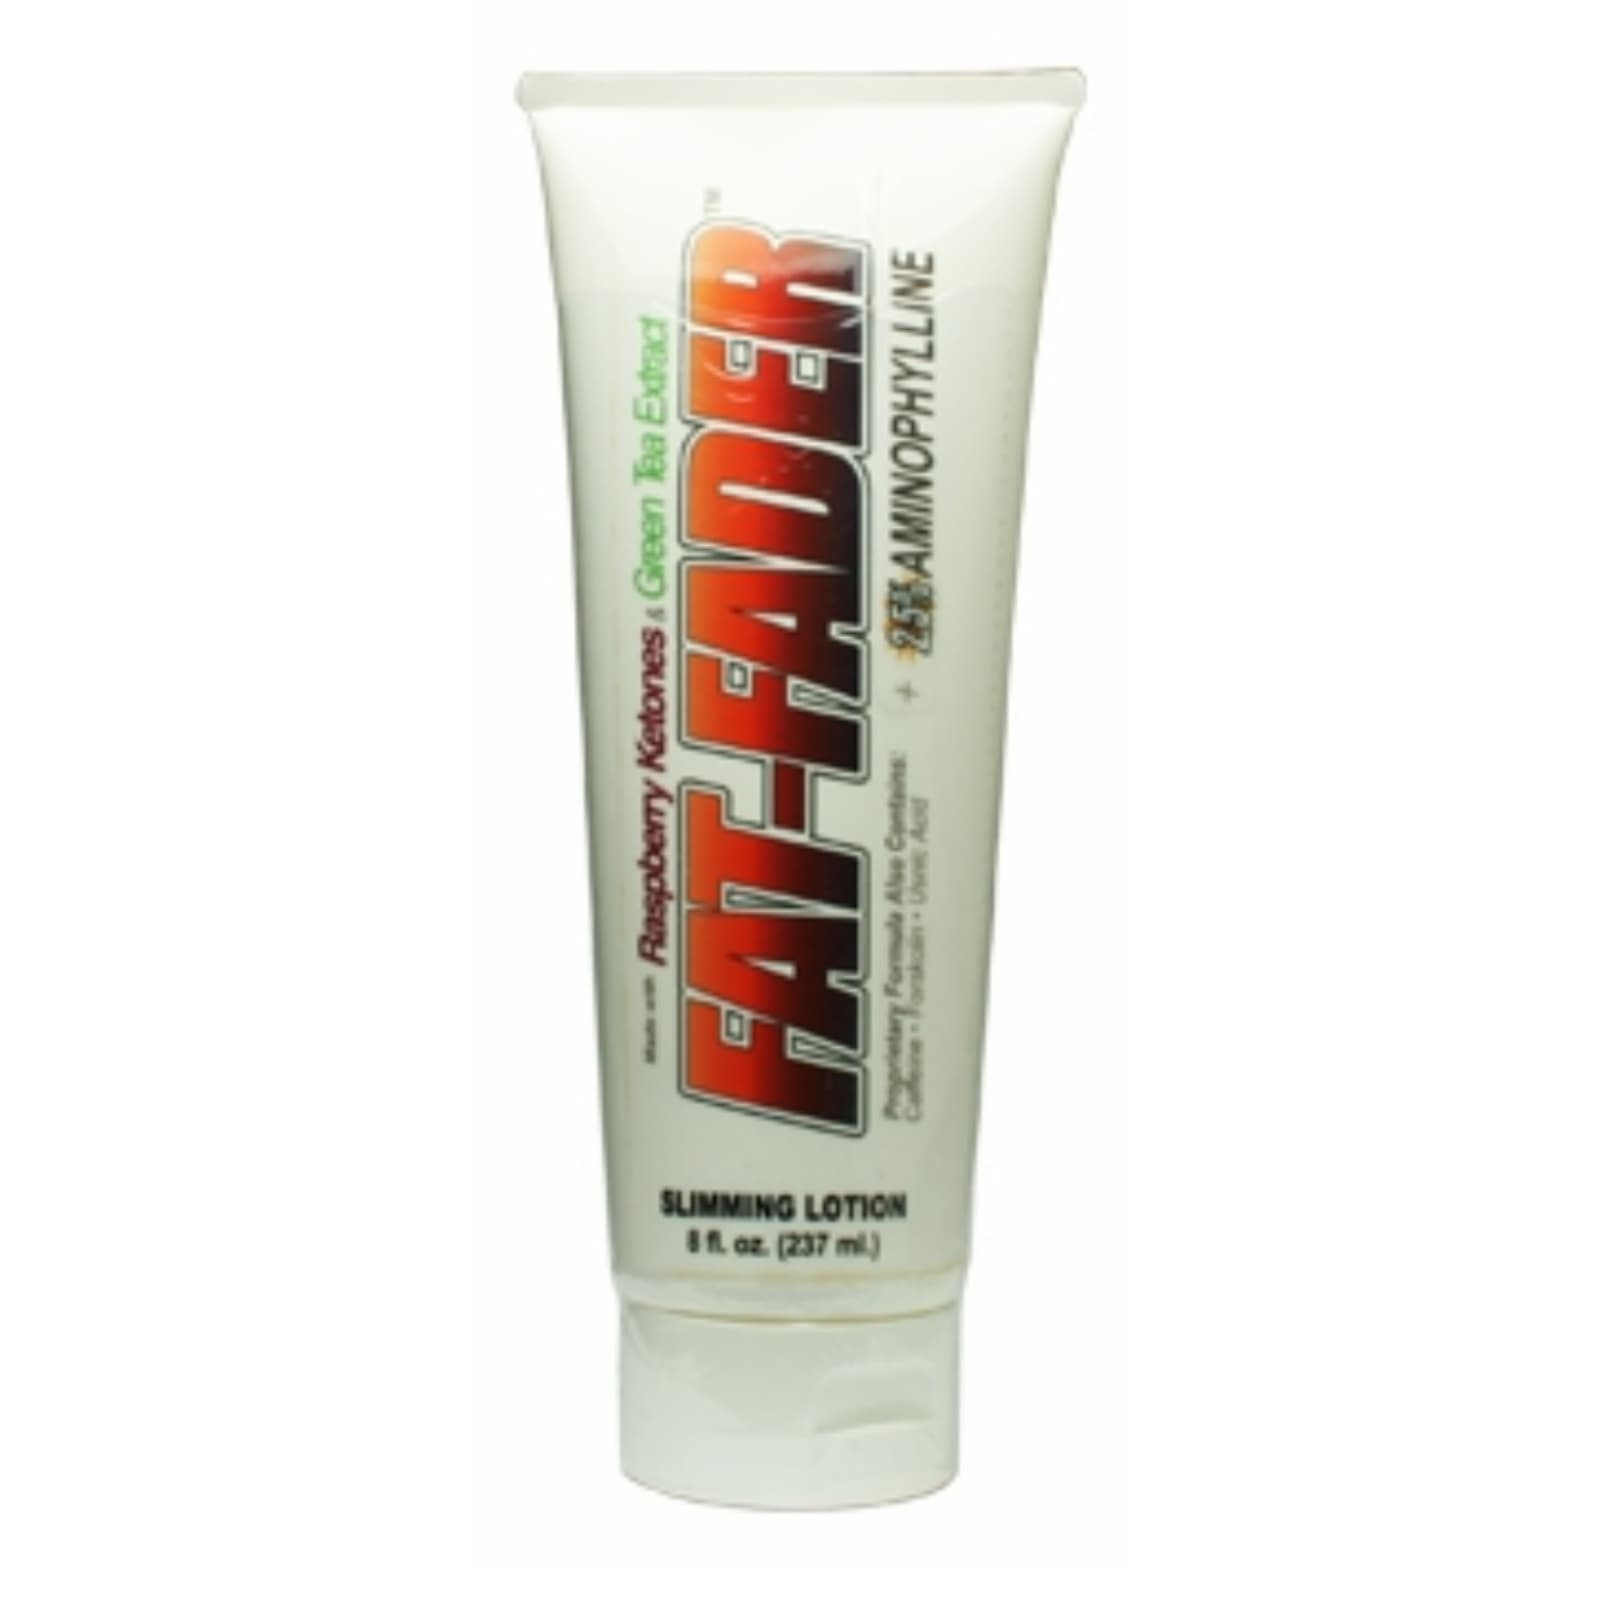 Fat Fader Slimming Lotion | Aminophylline Cream | Fat Fader Reviews